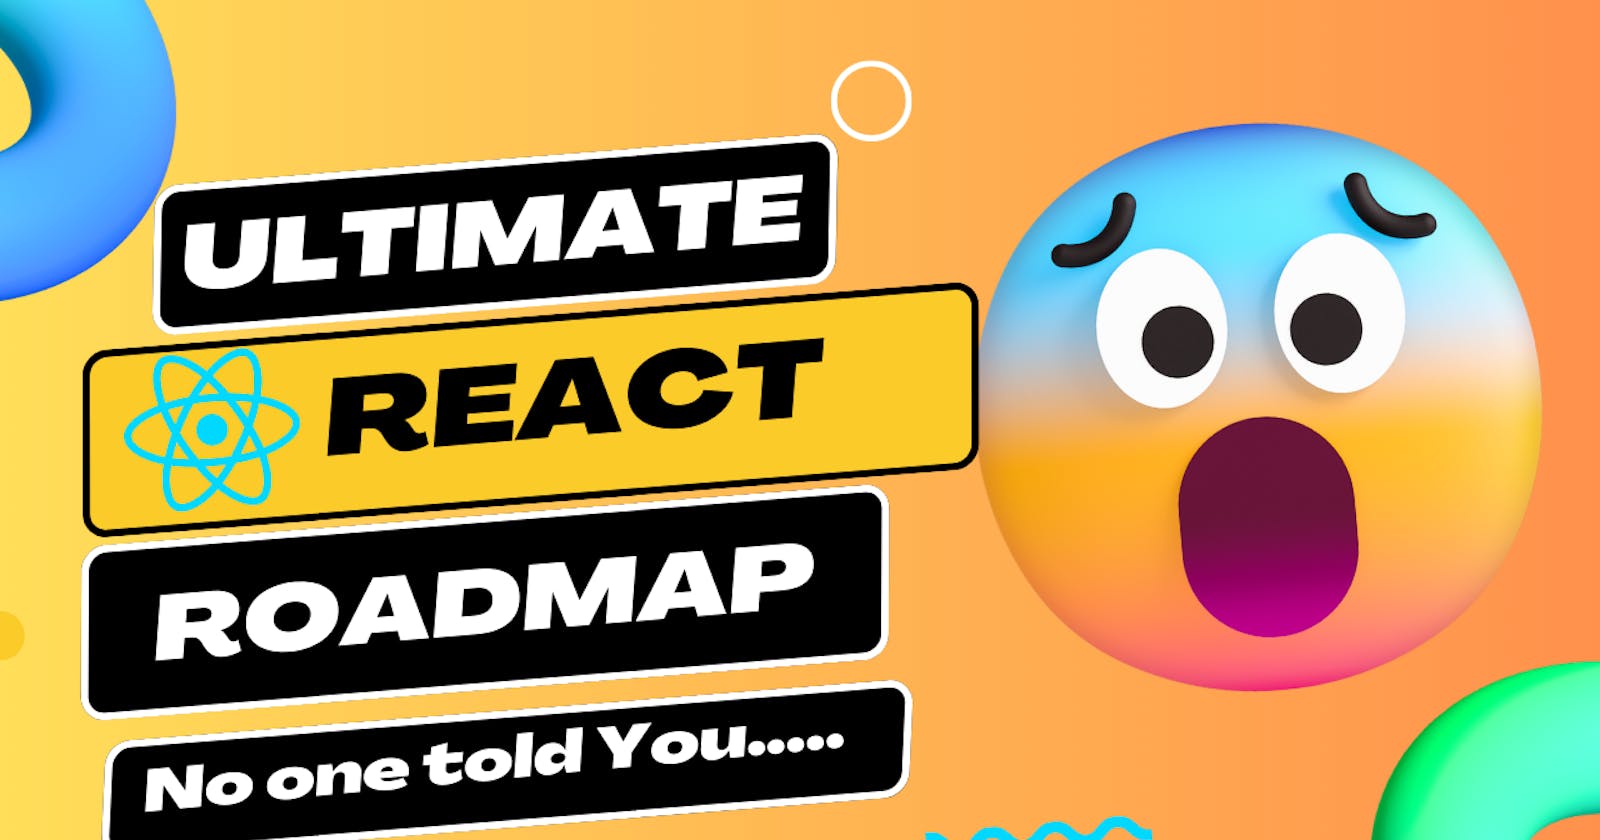 Ultimate React Roadmap No one told you: Mastering React